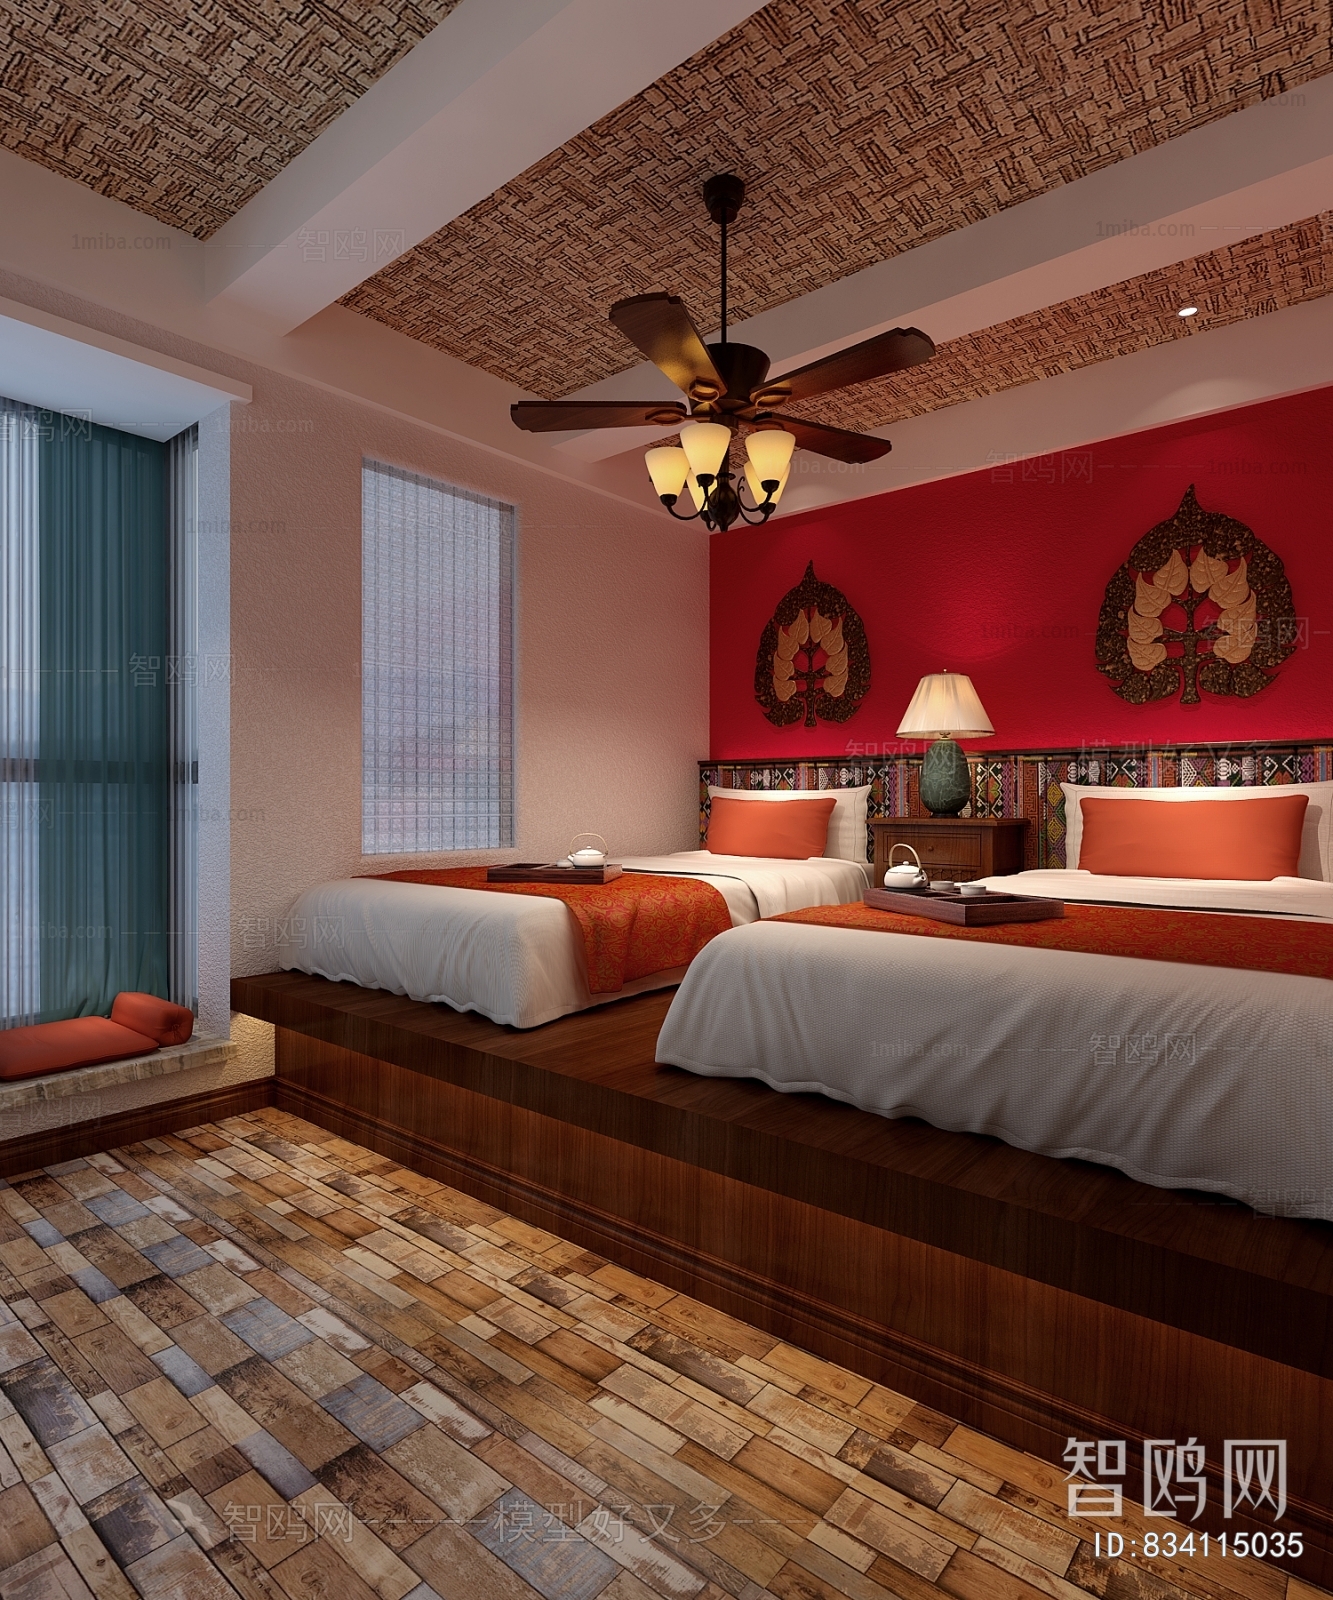 Southeast Asian Style Guest Room